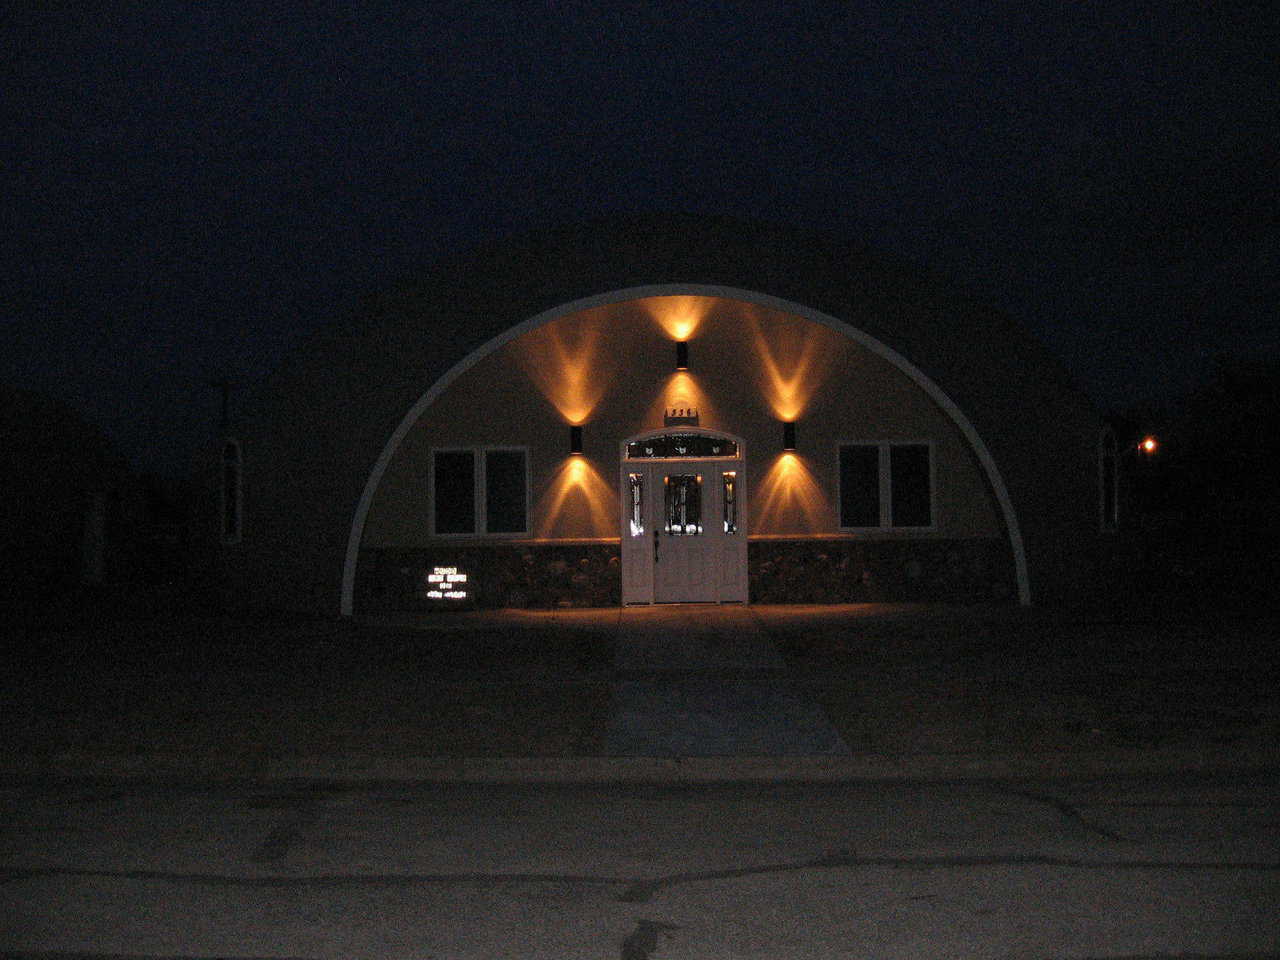 A welcoming light in the darkness! — Despite the hour or the weather, the Mudds feel safe and secure in their Monolithic Dome on the Prairie.